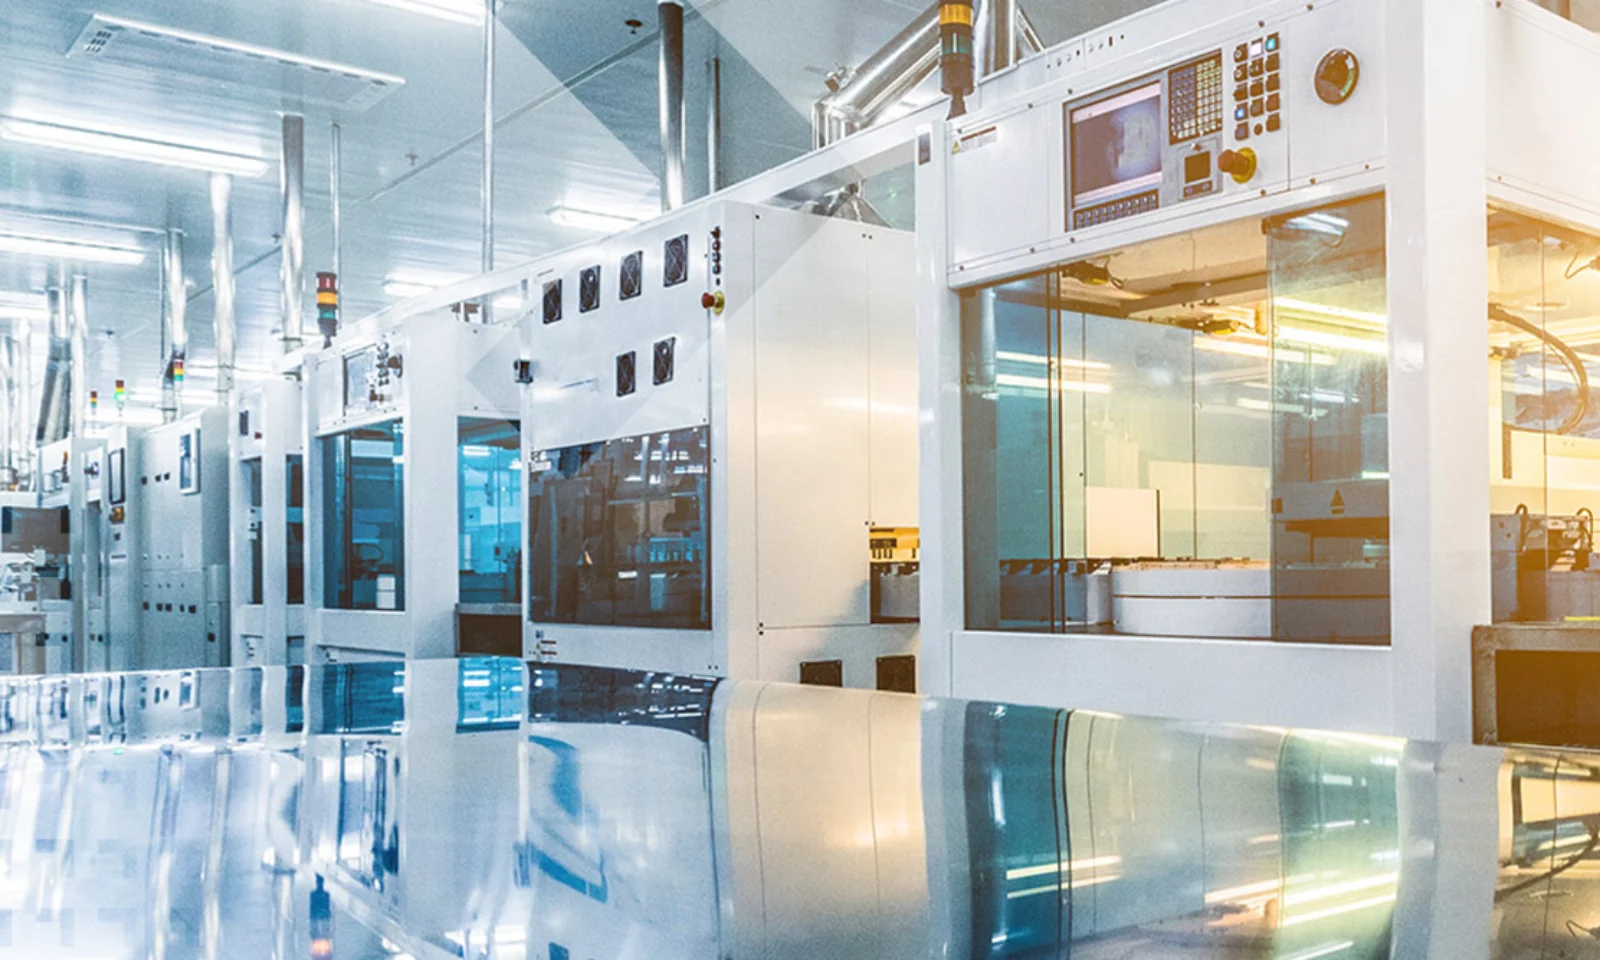 Explore the cutting-edge automated manufacturing facility featuring advanced machinery and high-tech equipment, highlighting innovation and efficiency in industrial production.